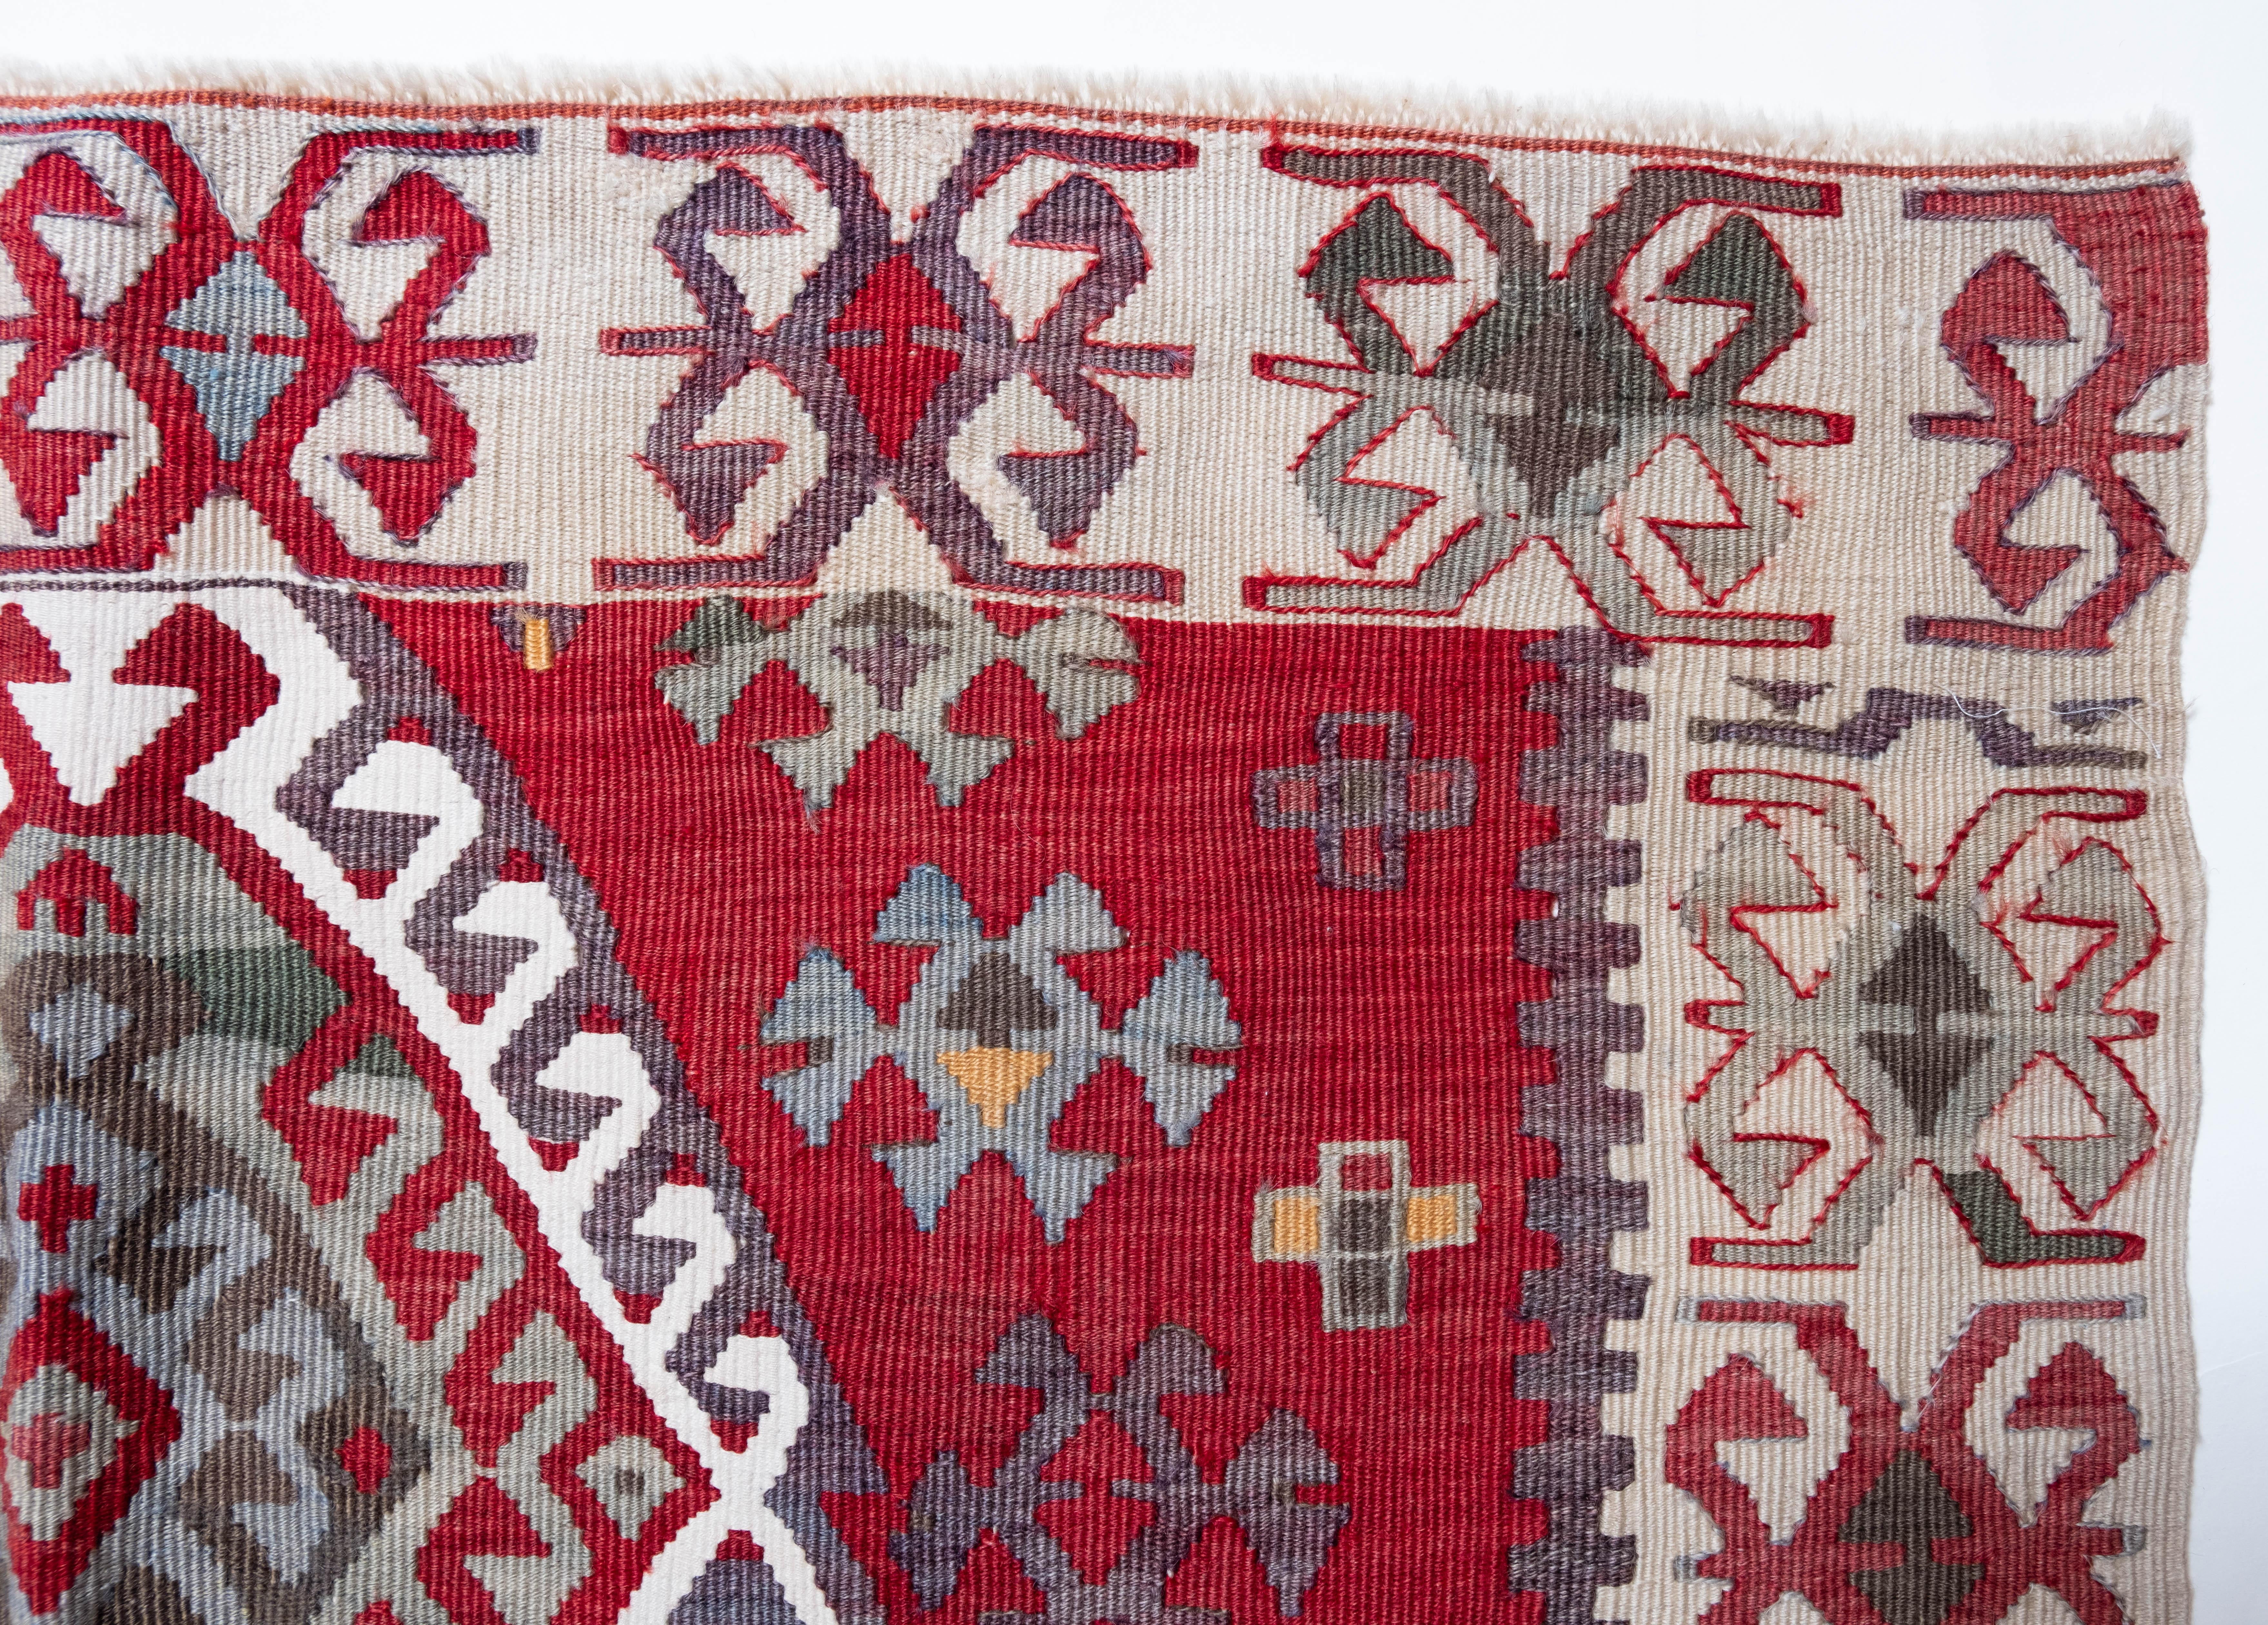 This is Central Anatolian Antique Mihrab Kilim, from the Cankiri region with a rare and beautiful color composition.

This highly collectible antique kilim has wonderful special colors and textures that are typical of an old kilim in good condition.